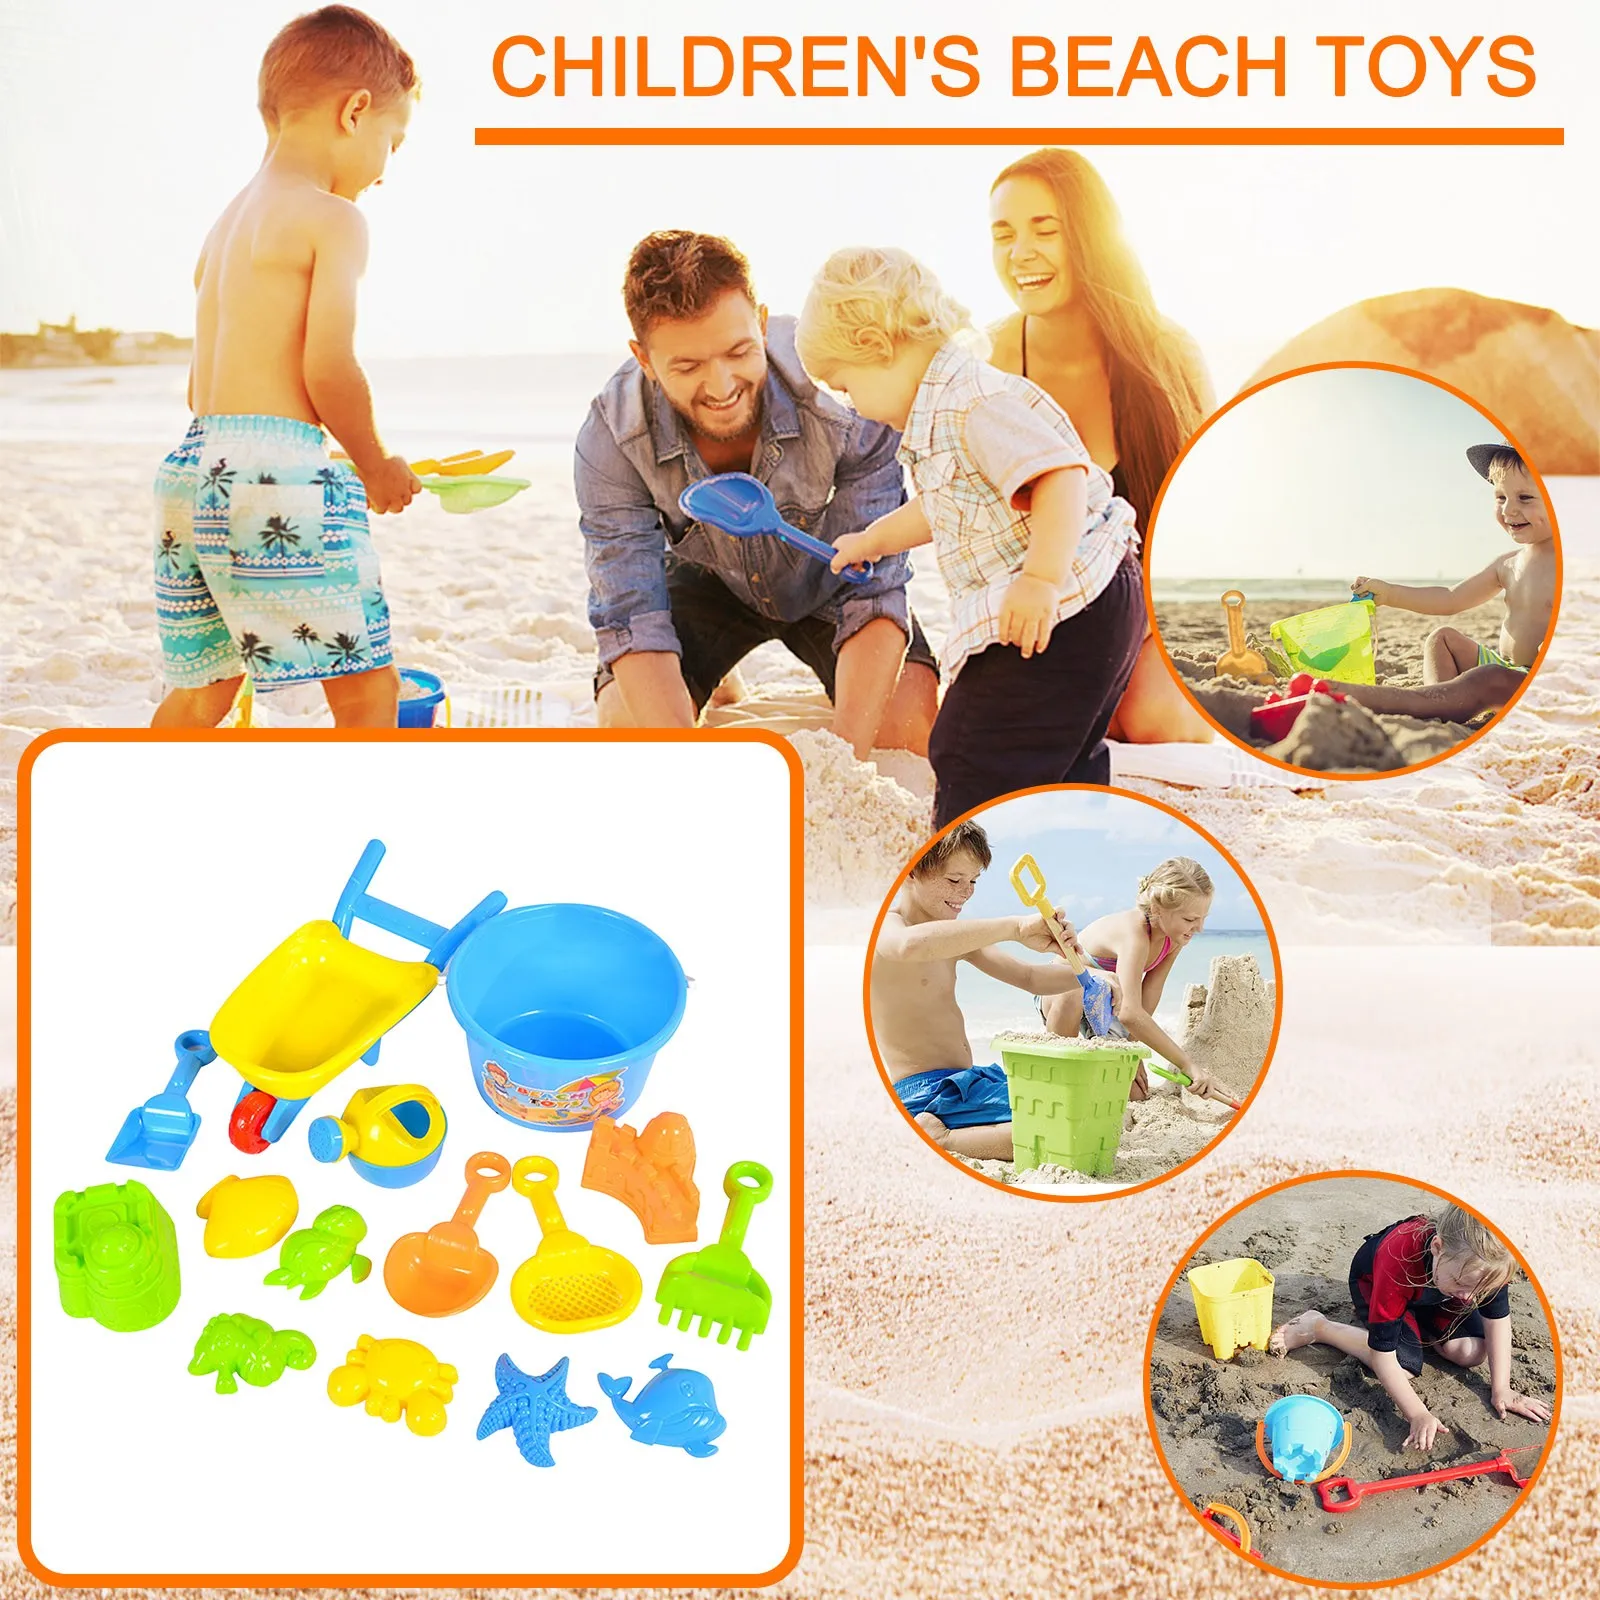 

15 Piece Beach Toy Sand Set Sand Play Sandpit Toy Summer Outdoor Toys Sand Castle Tool Cart Shovels Ducks Bucket Outdoor Toy#g30